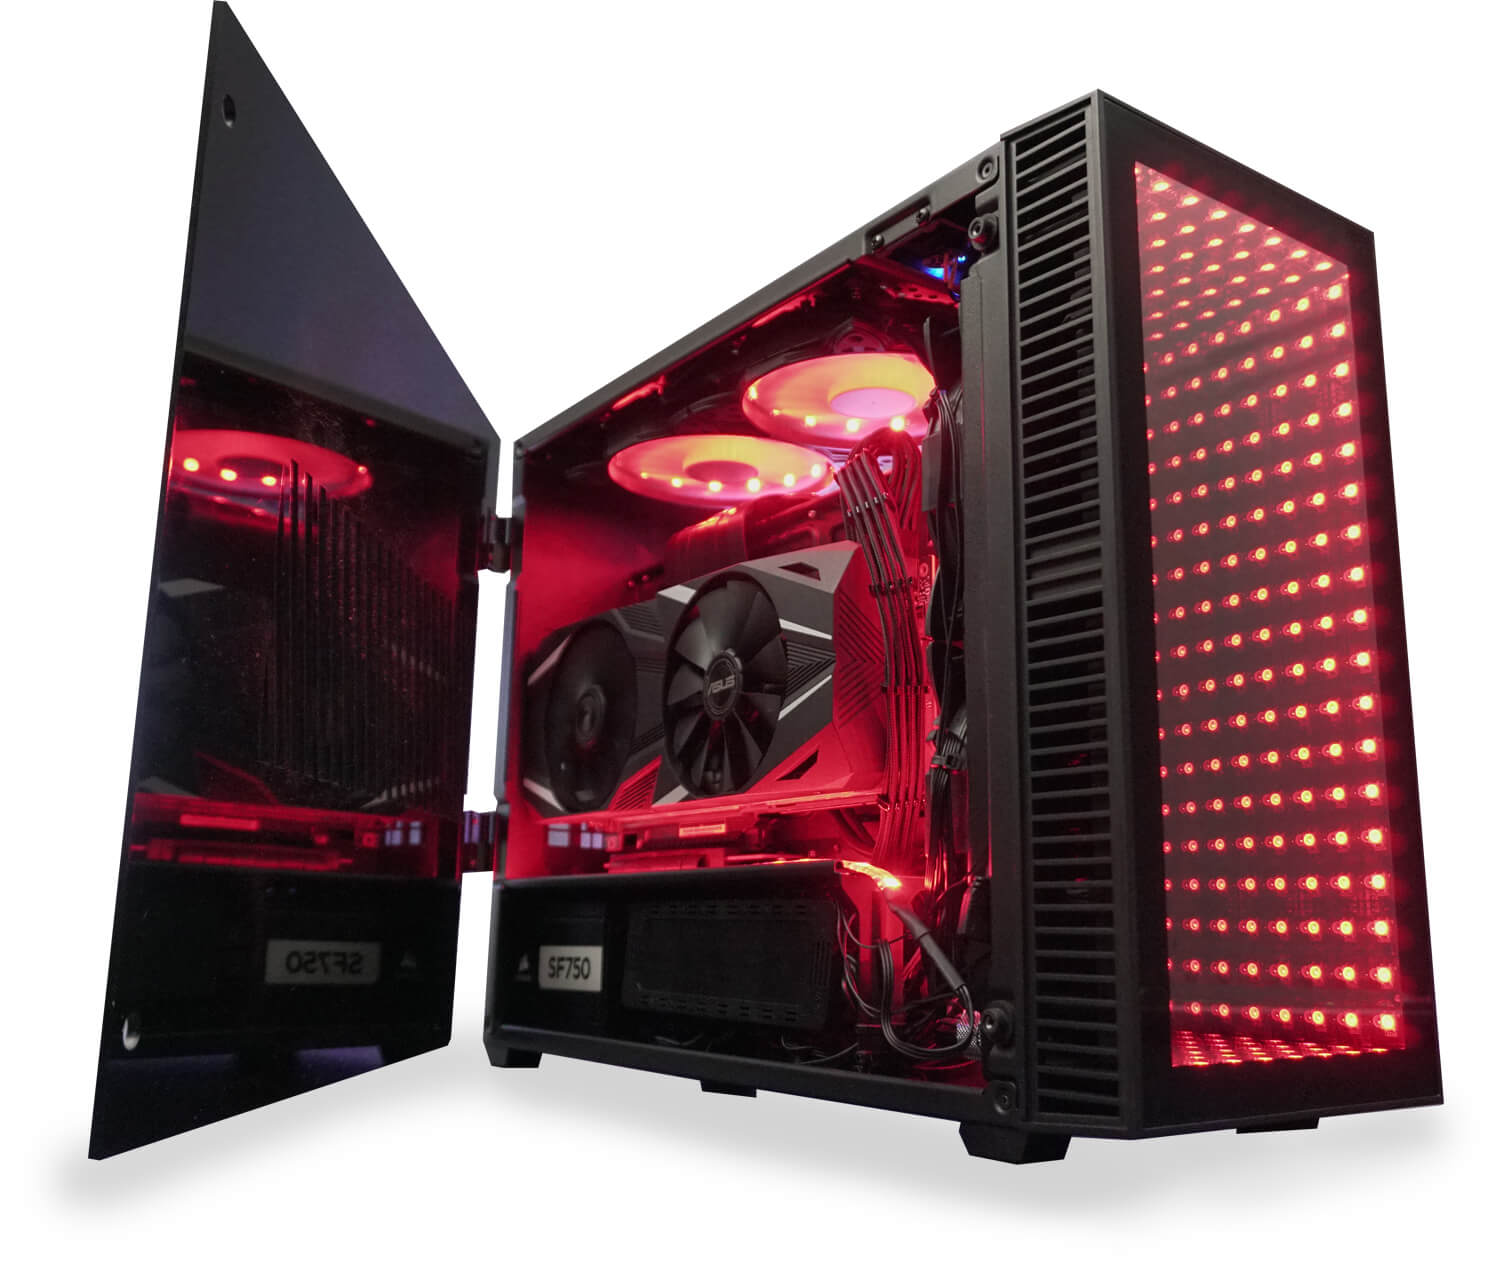 The Continuum Mini PC by Computer Upgrade King features 2 high airflow front fans and 2 exhaust fans